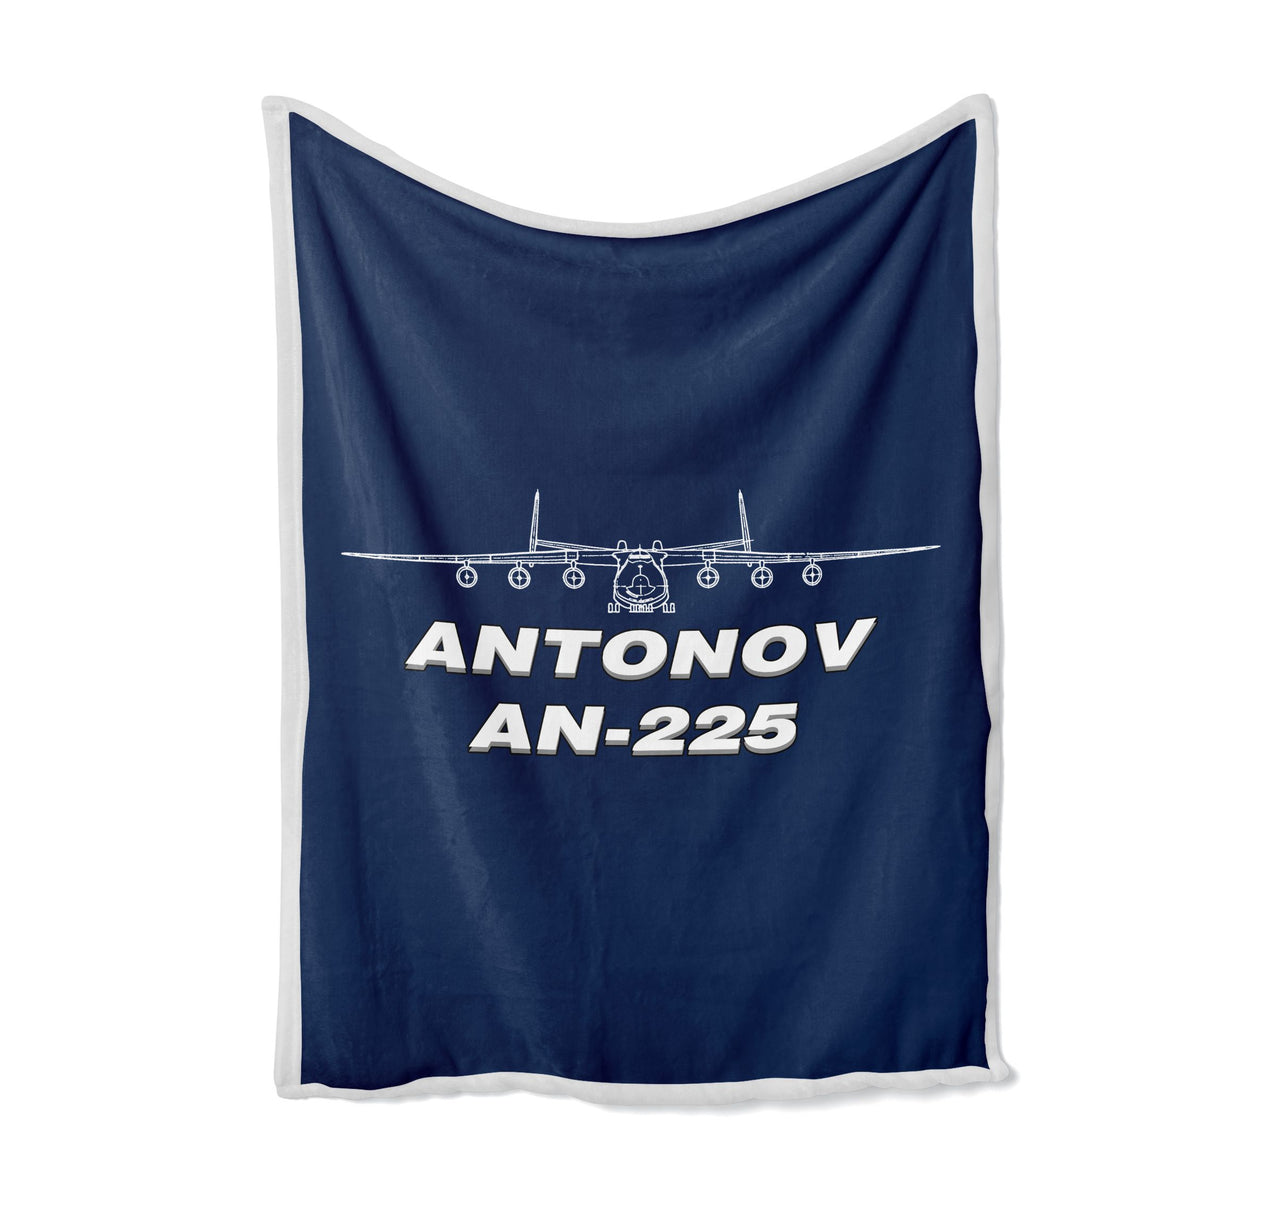 Antonov AN-225 (26) Designed Bed Blankets & Covers